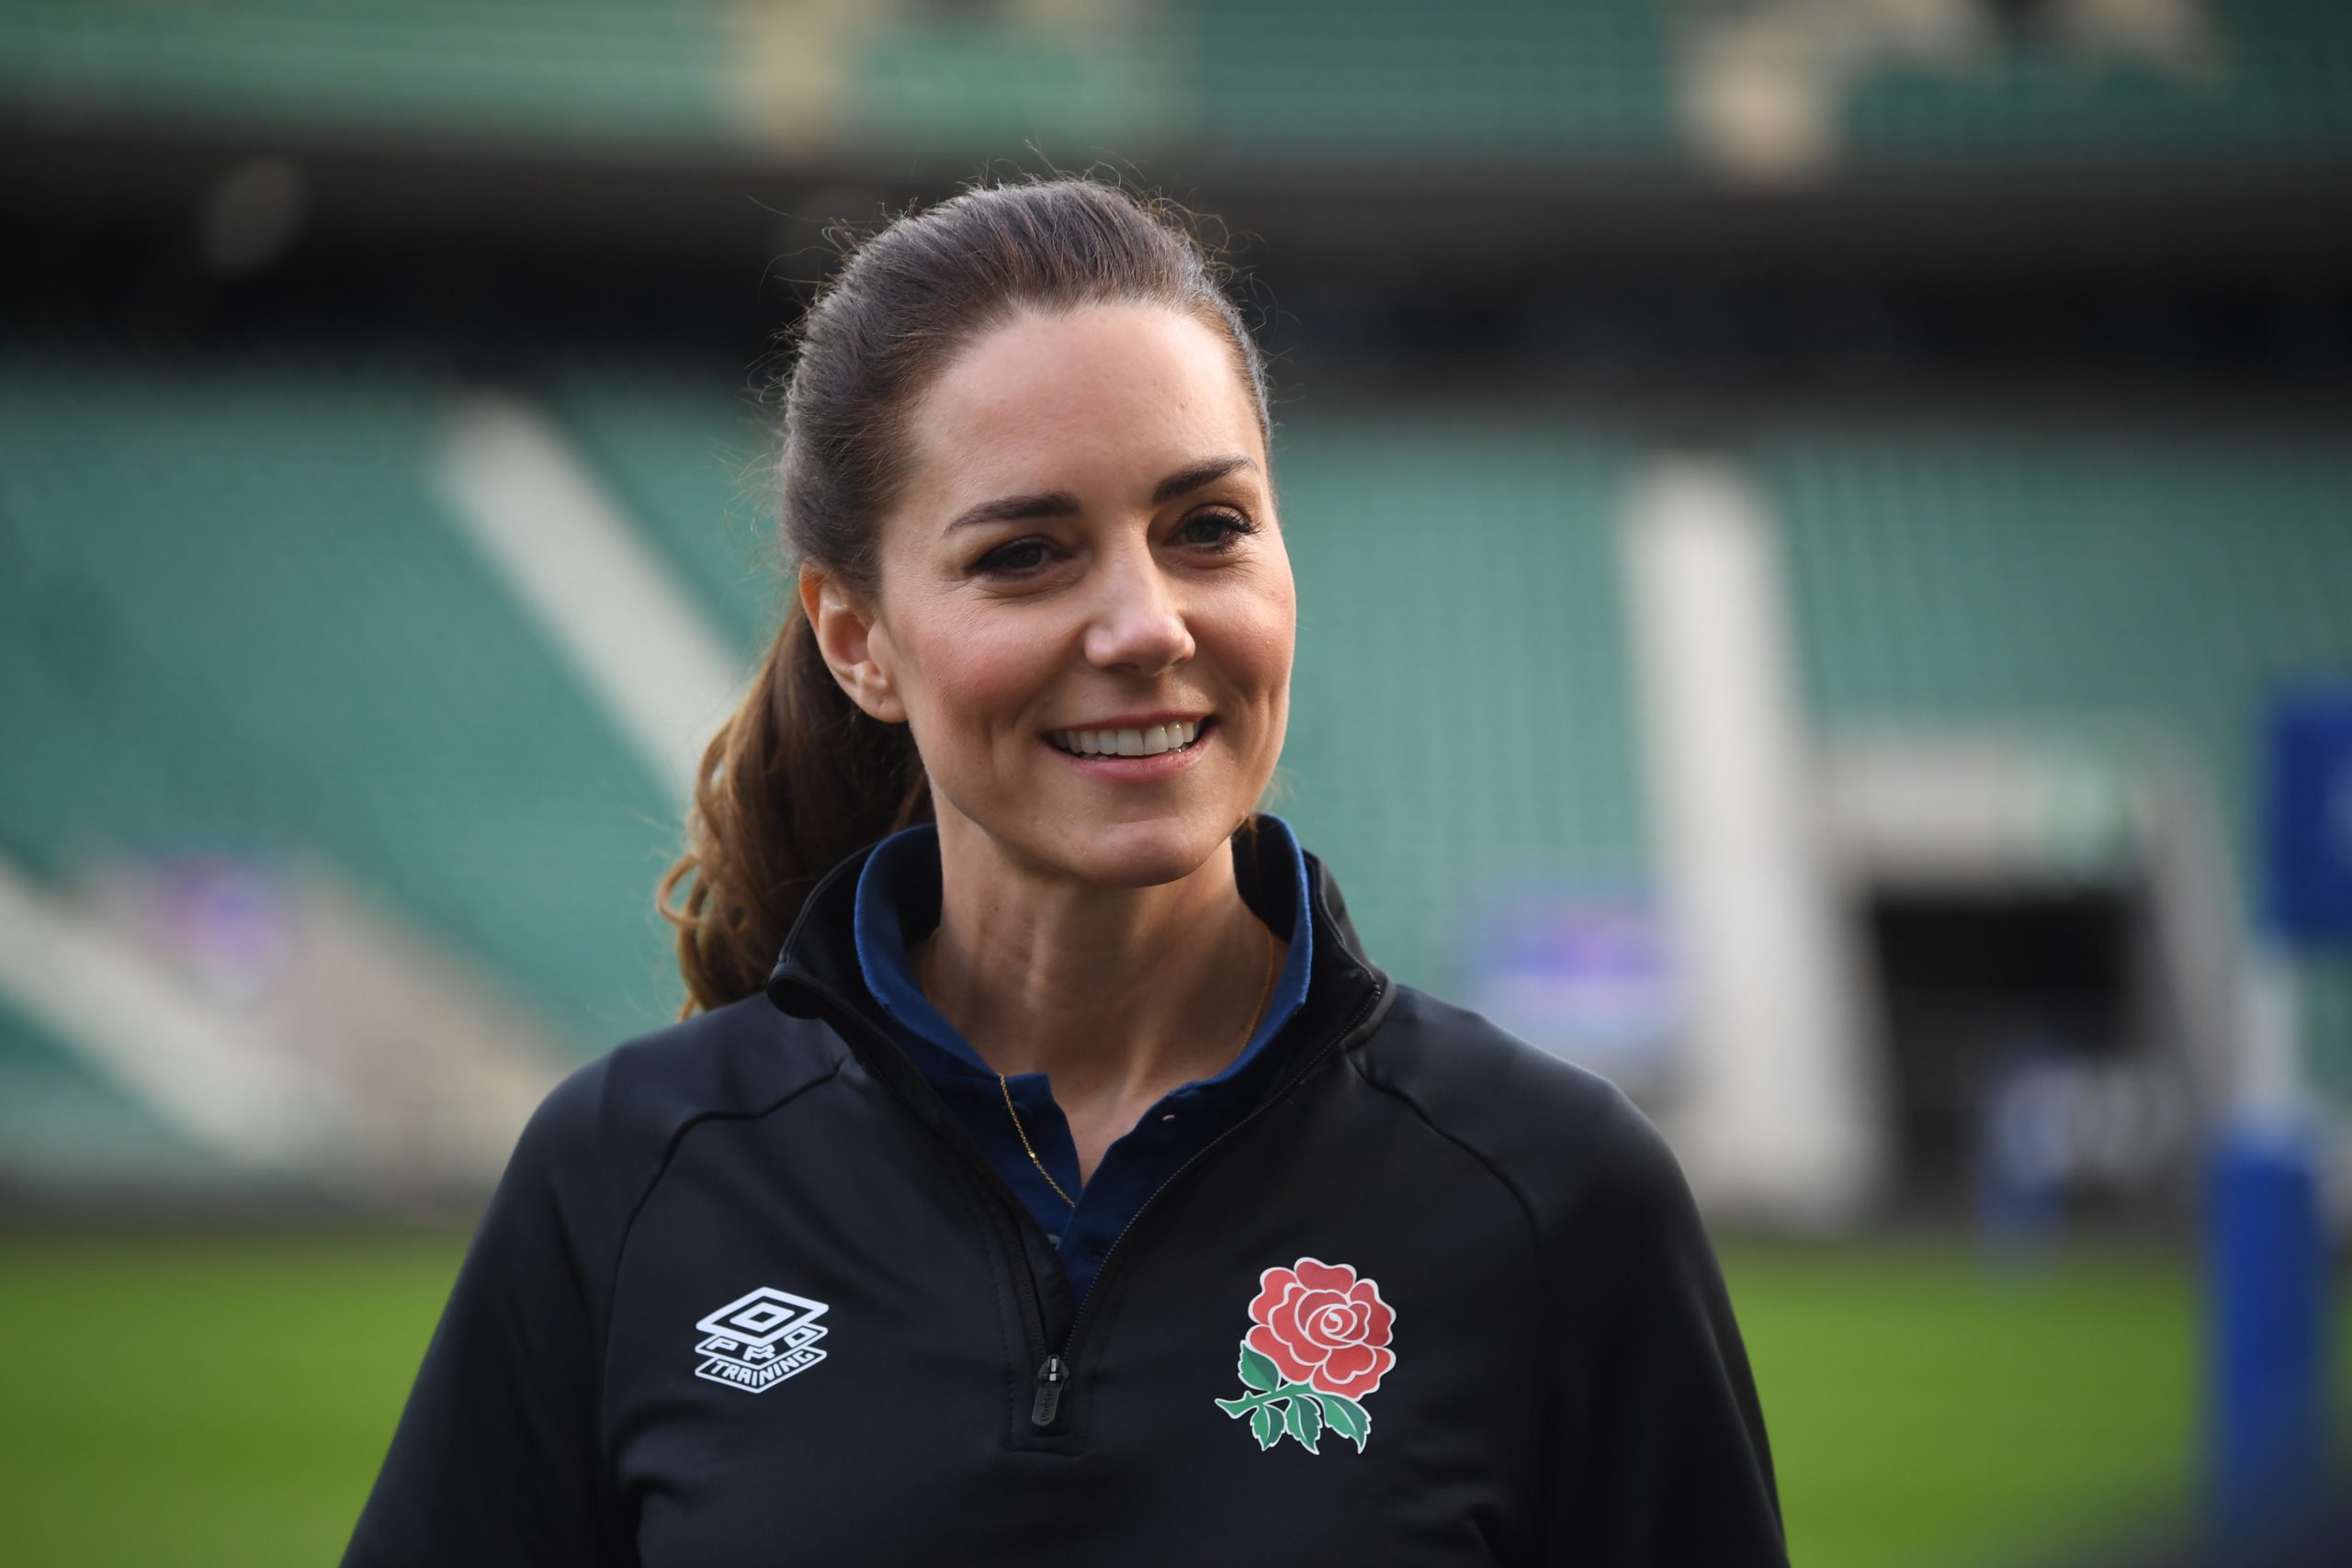 Princess of Wales to attend England’s World Cup quarter-final against PNG